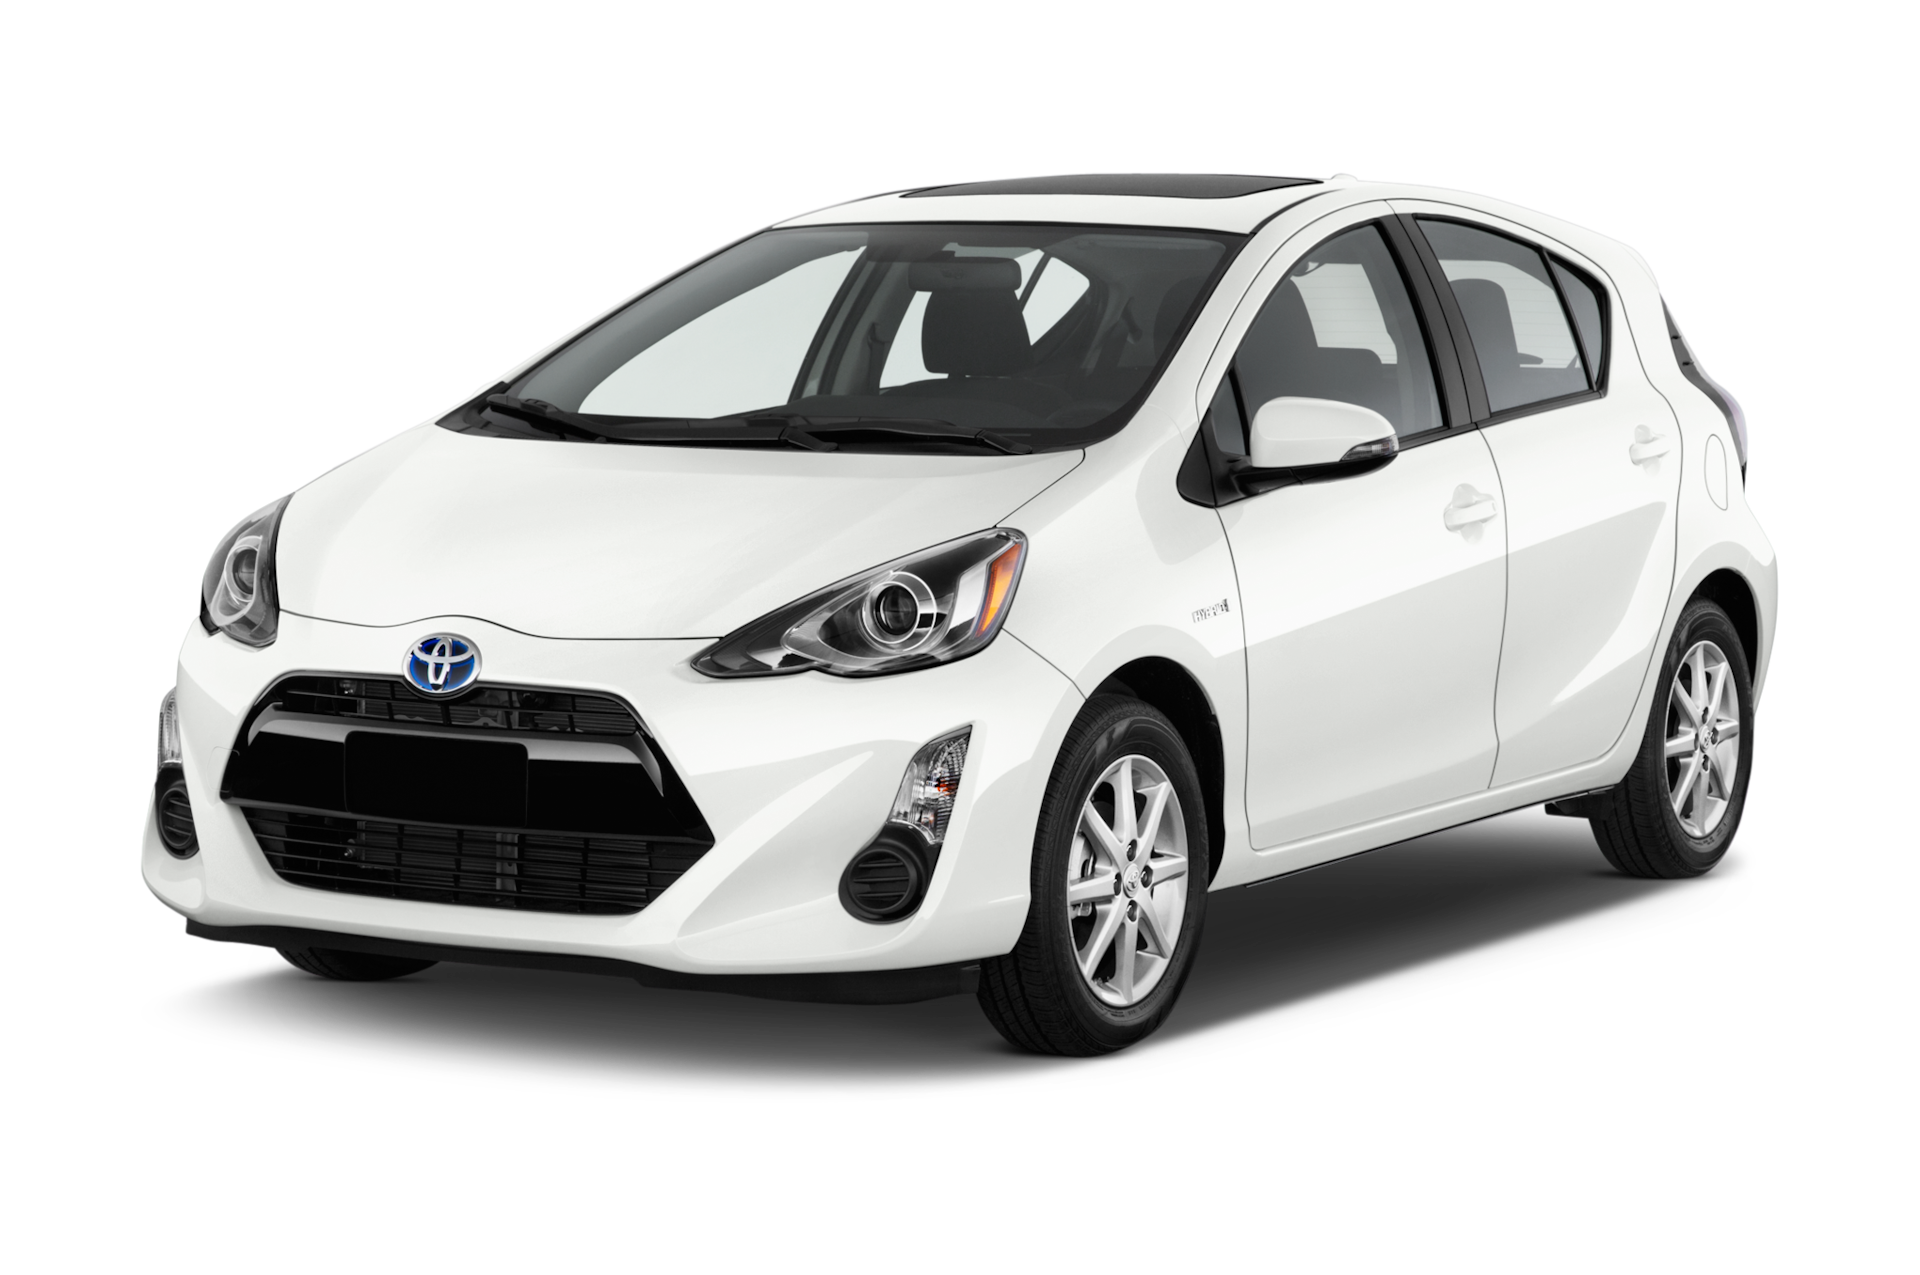 2015 Toyota Prius c Prices, Reviews, and Photos - MotorTrend